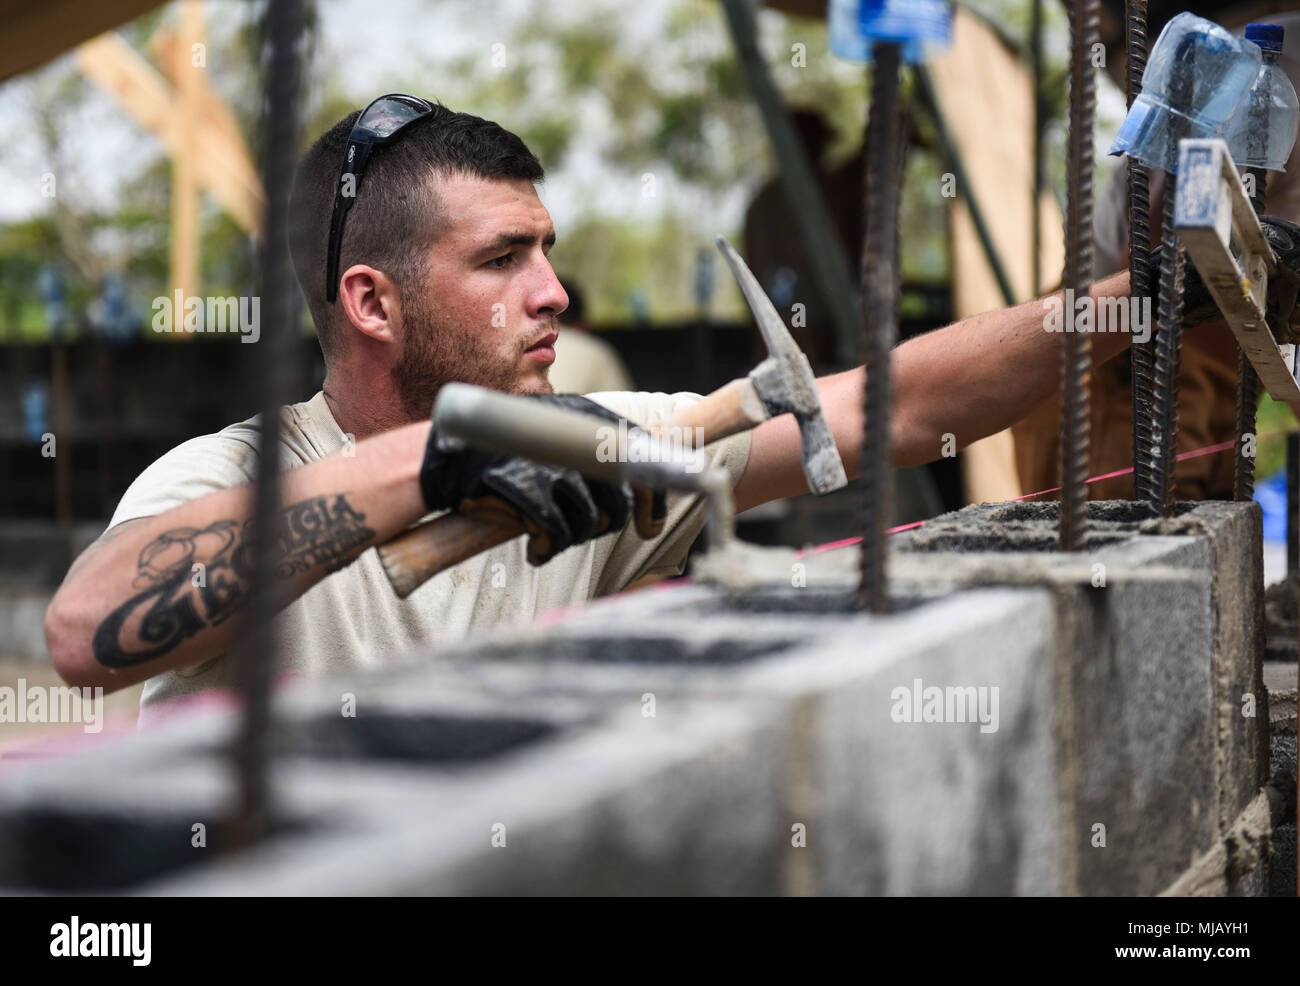 U.S. Air Force Senior Airman Dan Bentz, 346th Air Expeditionary Group Rapid Engineer Deployable Heavy Operational Repair Squadron Engineer member who is deployed from Nellis Air Force Base, Nev., hammers a concrete block into place April 27, 2018 at a construction site in Meteti, Panama. Bentz is participating in Exercise New Horizons 2018, which will assist communities throughout Panama by providing medical assistance and building facilities such as schools, a youth community center and a women’s health ward. (U.S. Air Force photo by Senior Airman Dustin Mullen/Released) Stock Photo